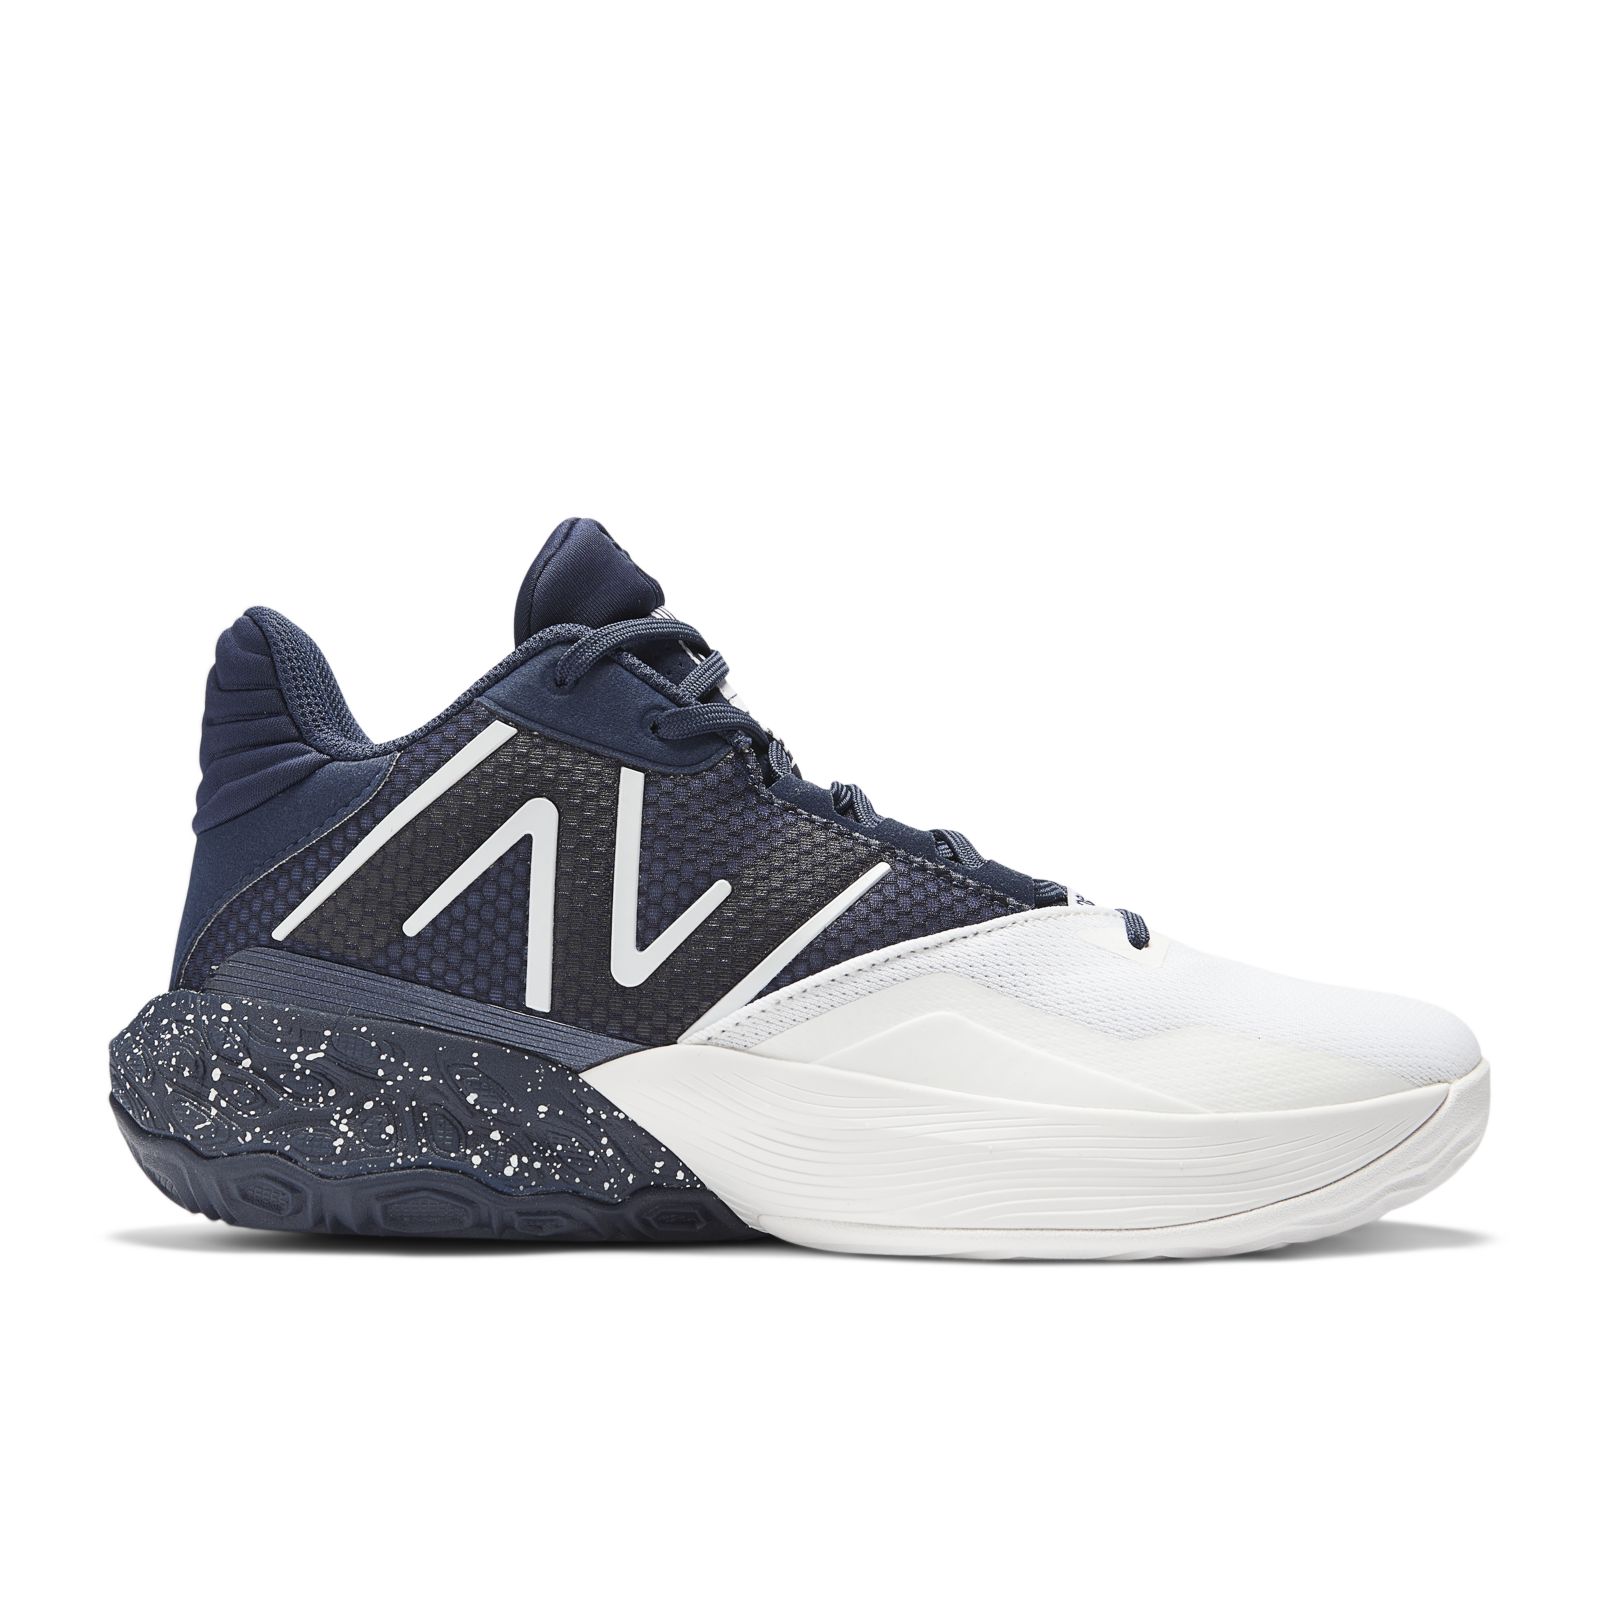 TWO WXY V4 - Joe's New Balance Outlet